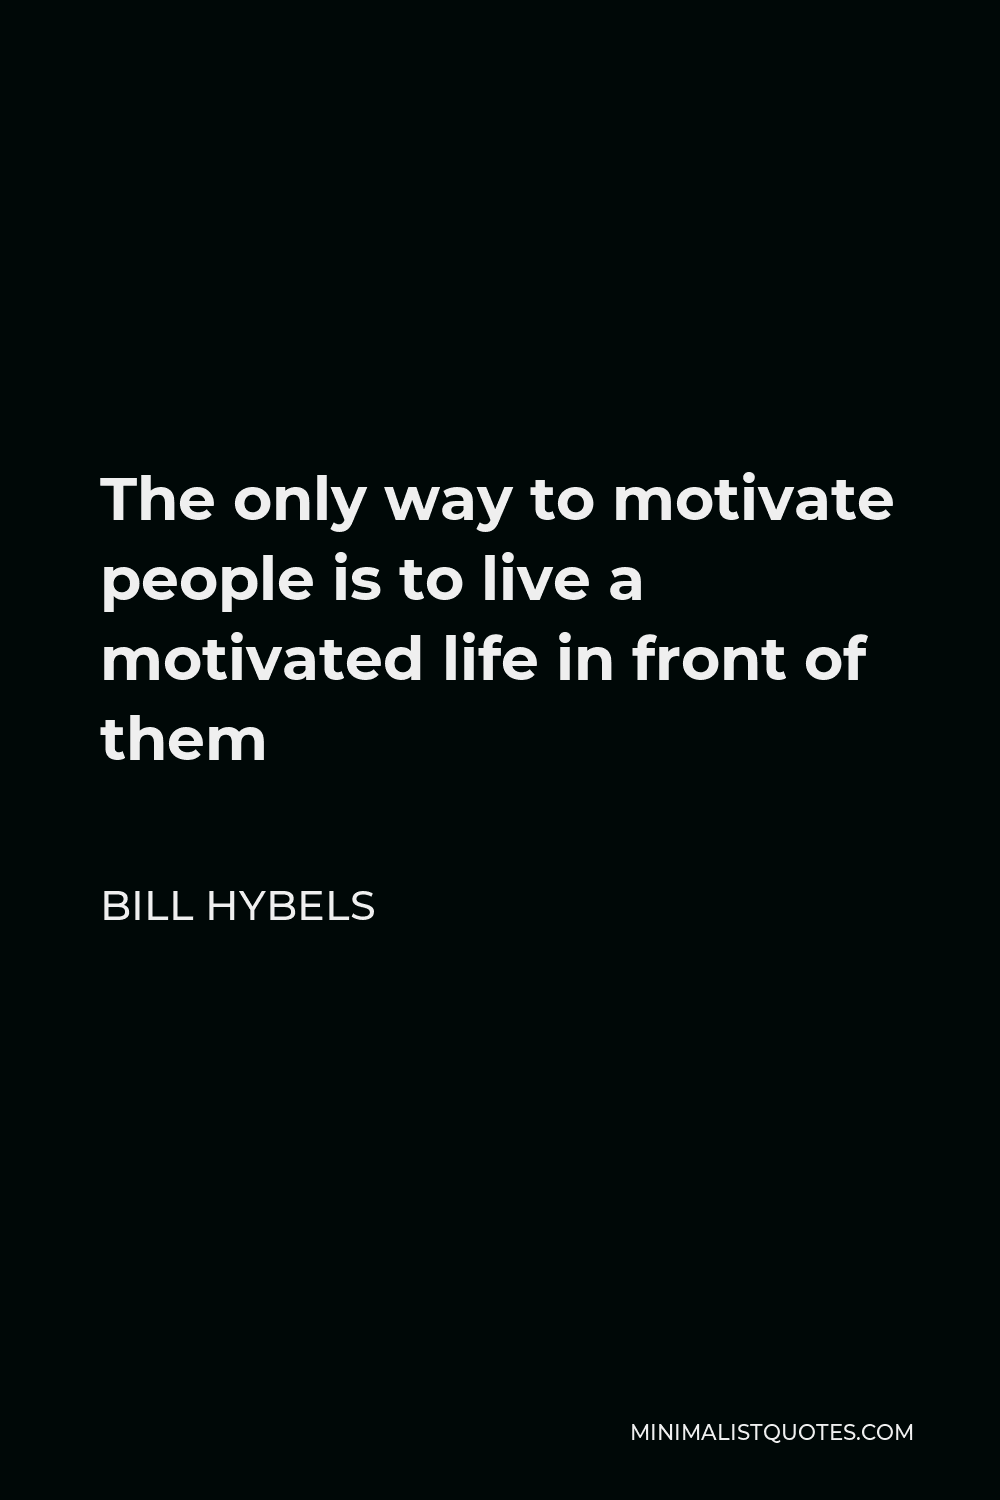 Bill Hybels Quote - The only way to motivate people is to live a motivated life in front of them